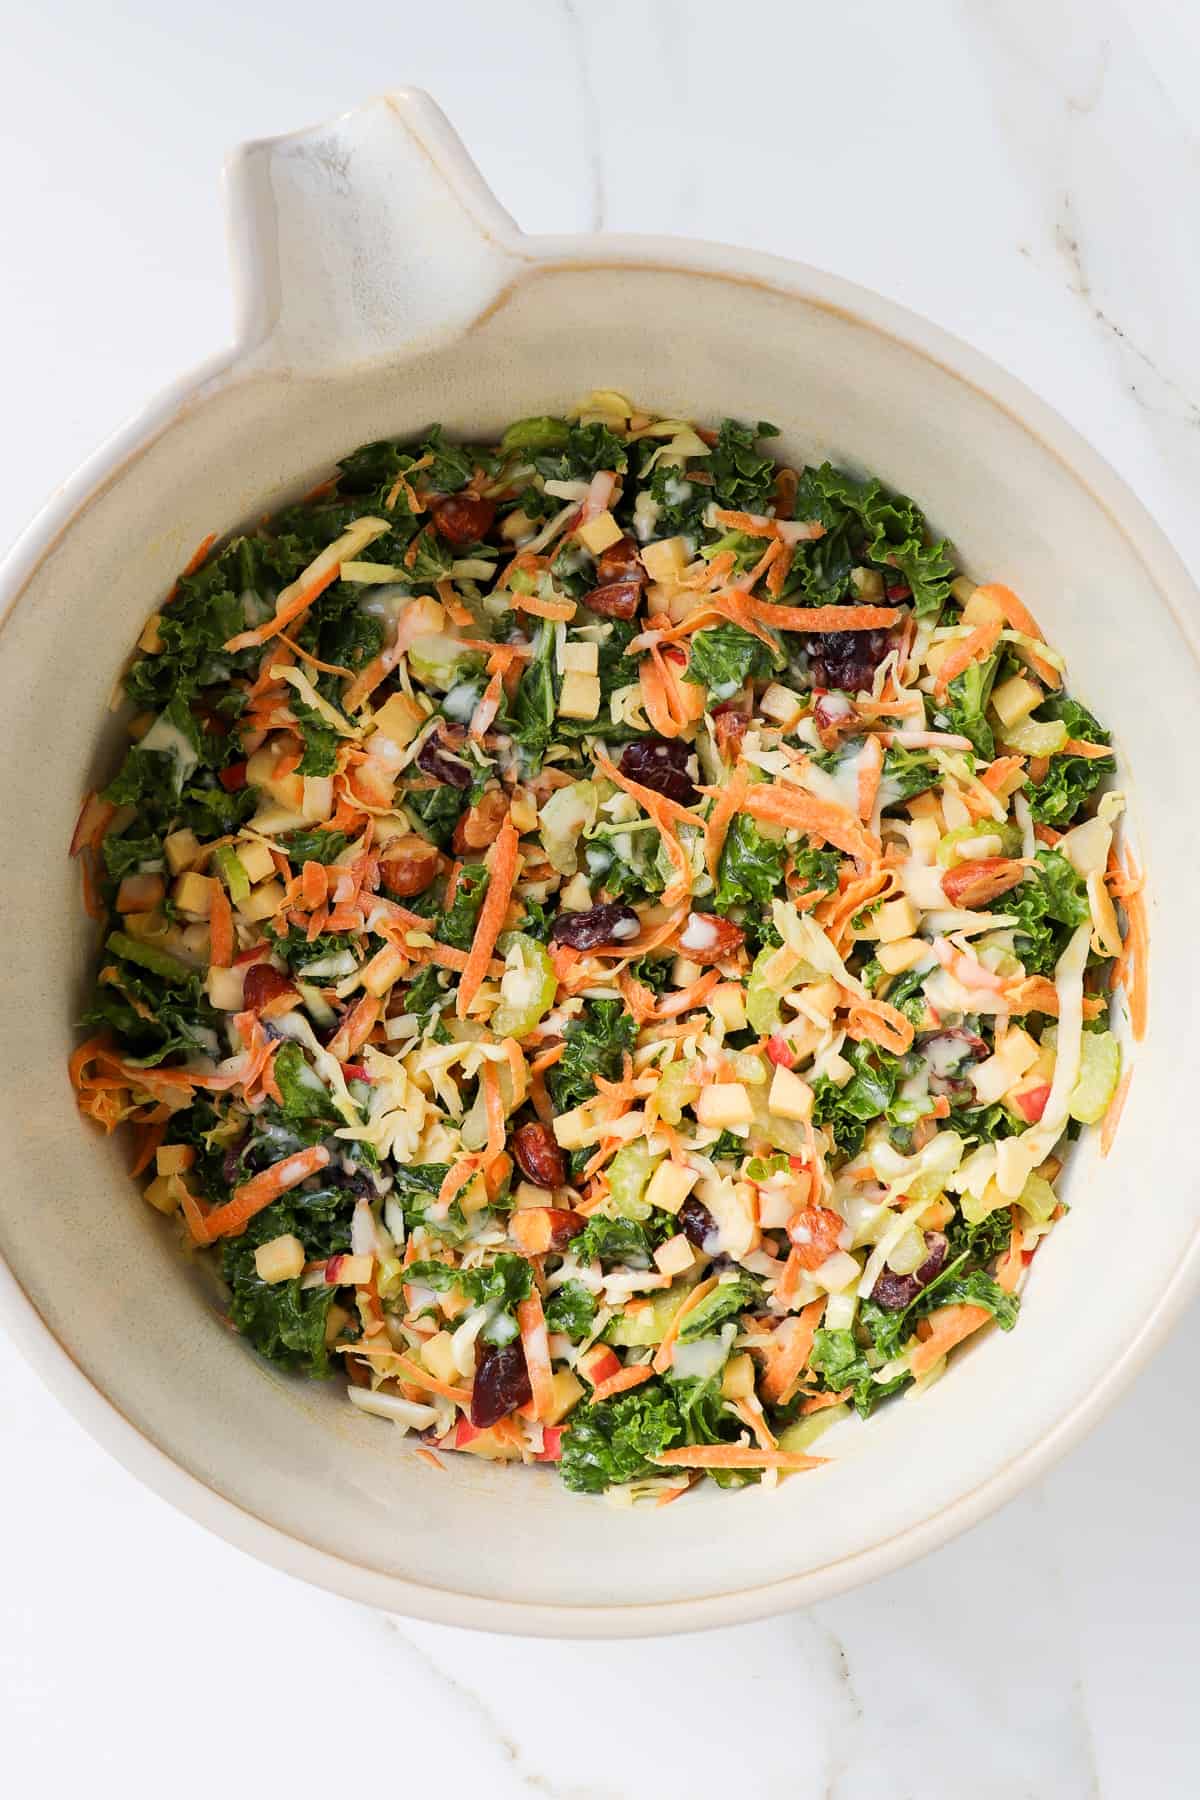 Crunchy kale salad in a large mixing bowl.